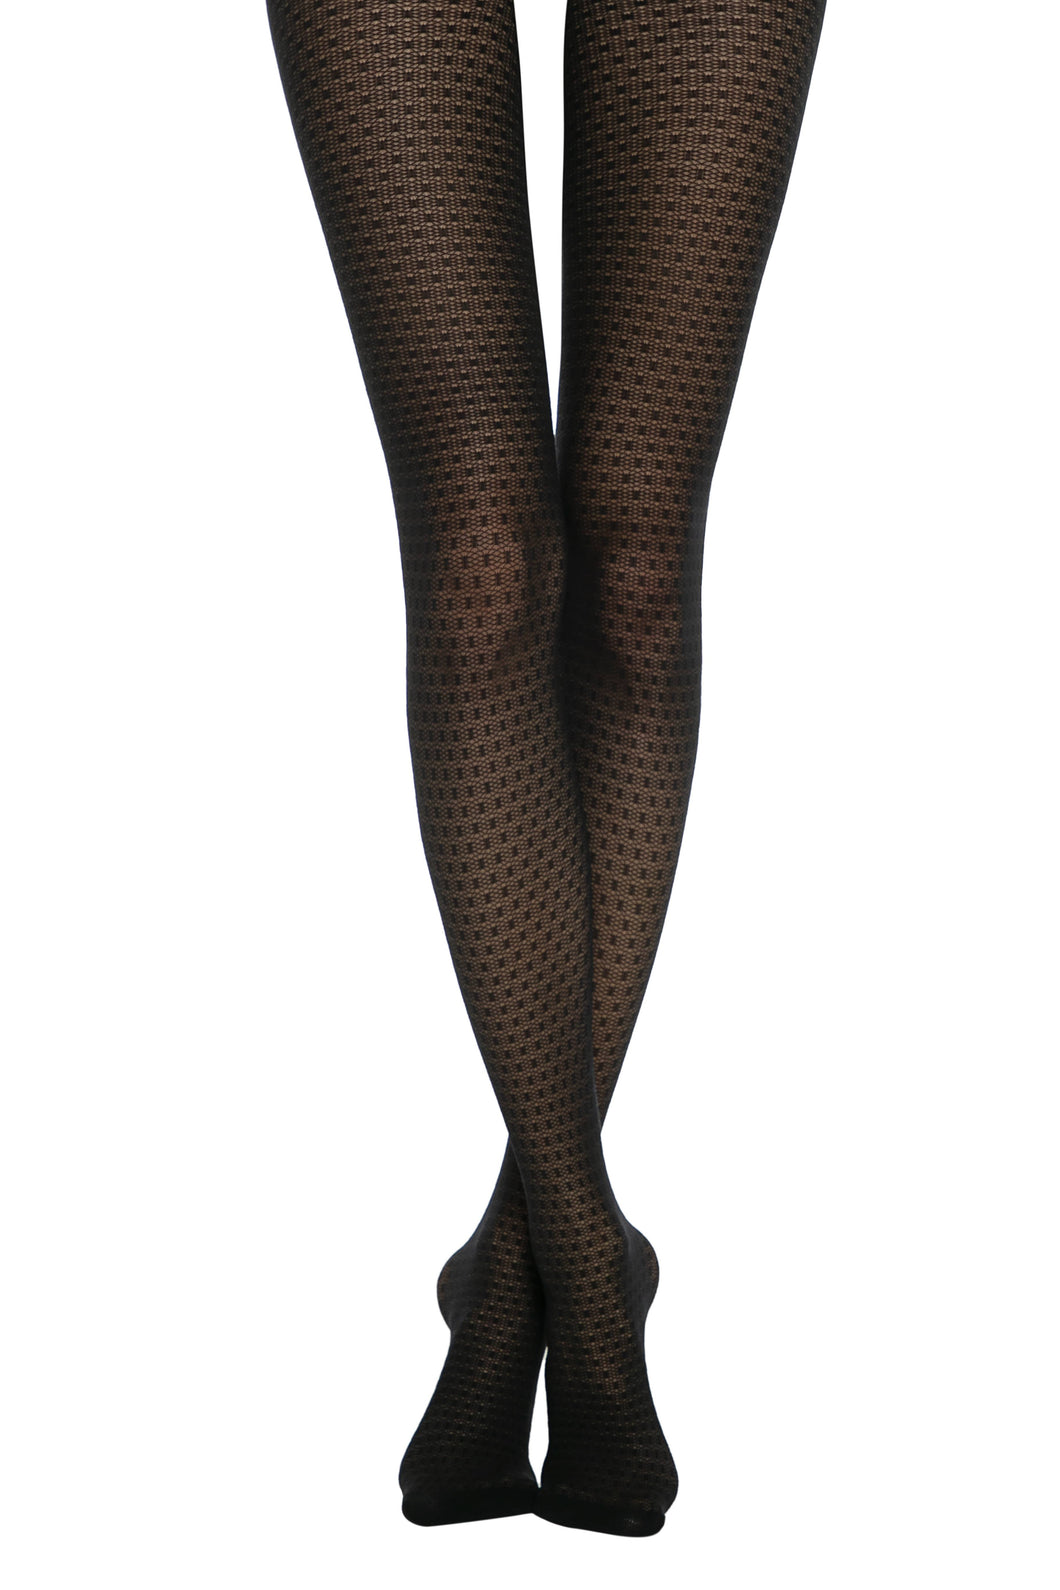 Conte Vision 30 Den - Fantasy Women's Tights with an openwork geometric pattern 